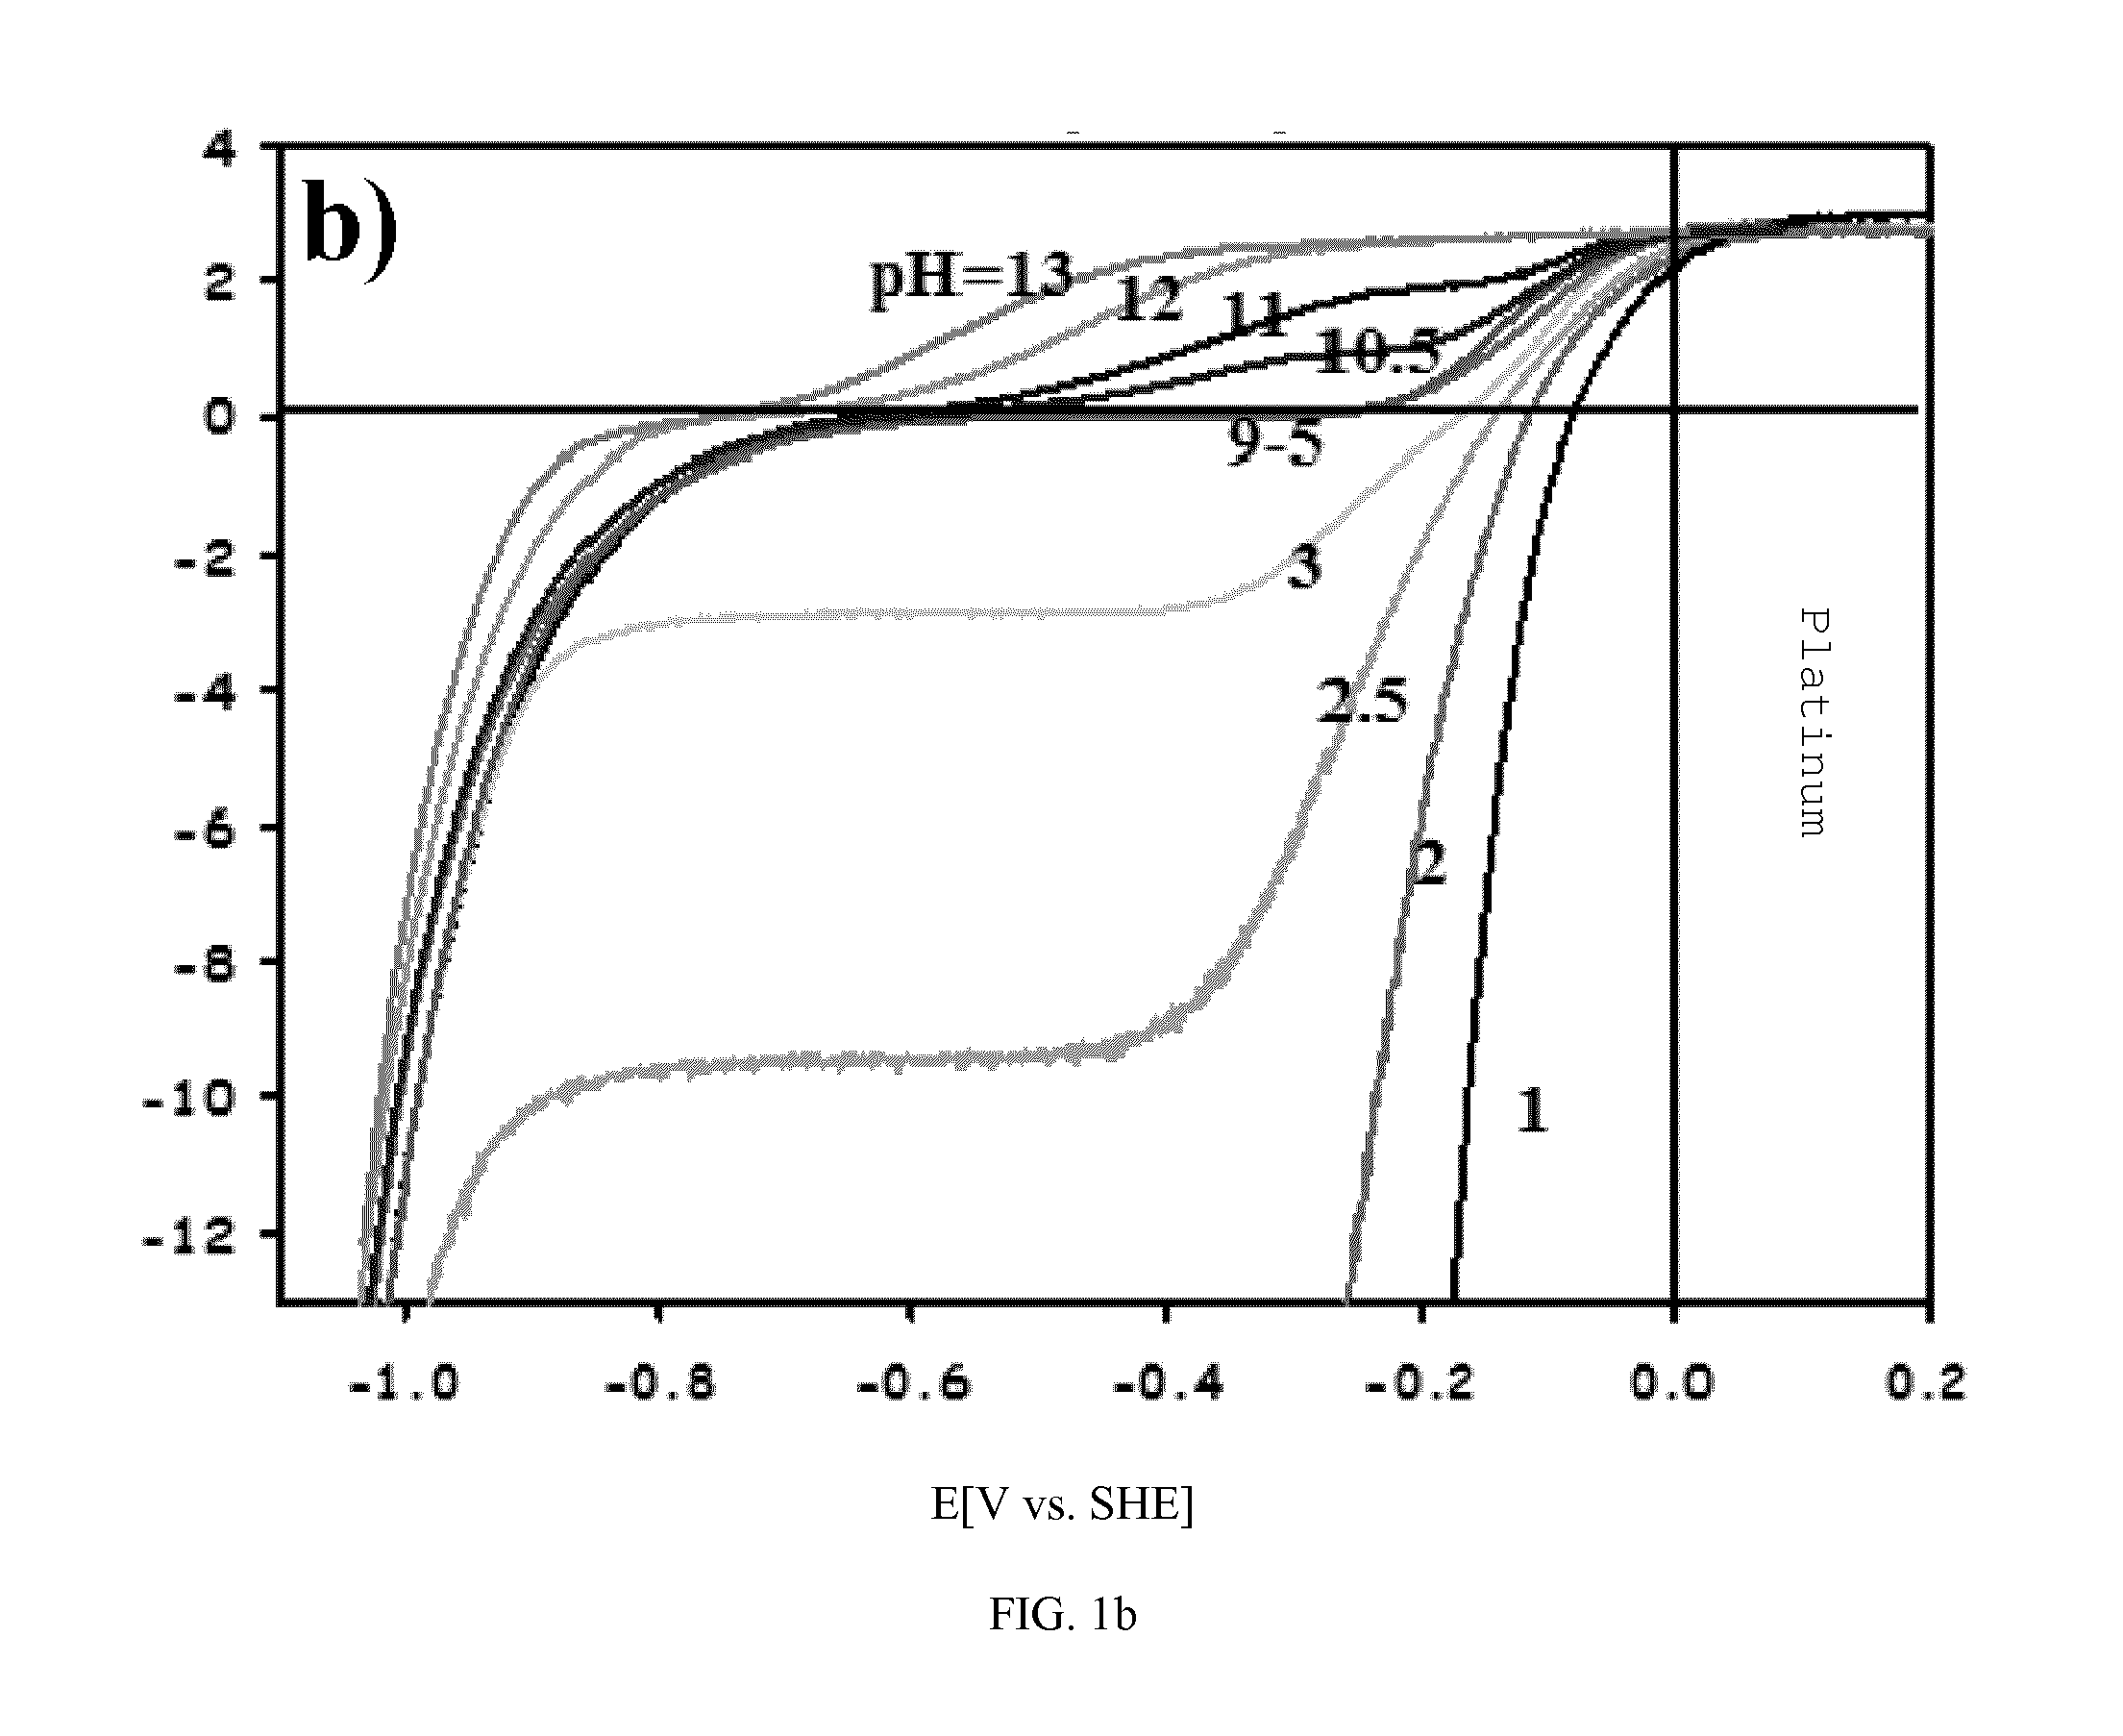 Hydrogen oxidation reaction rate by promotion of hydroxyl adsorption